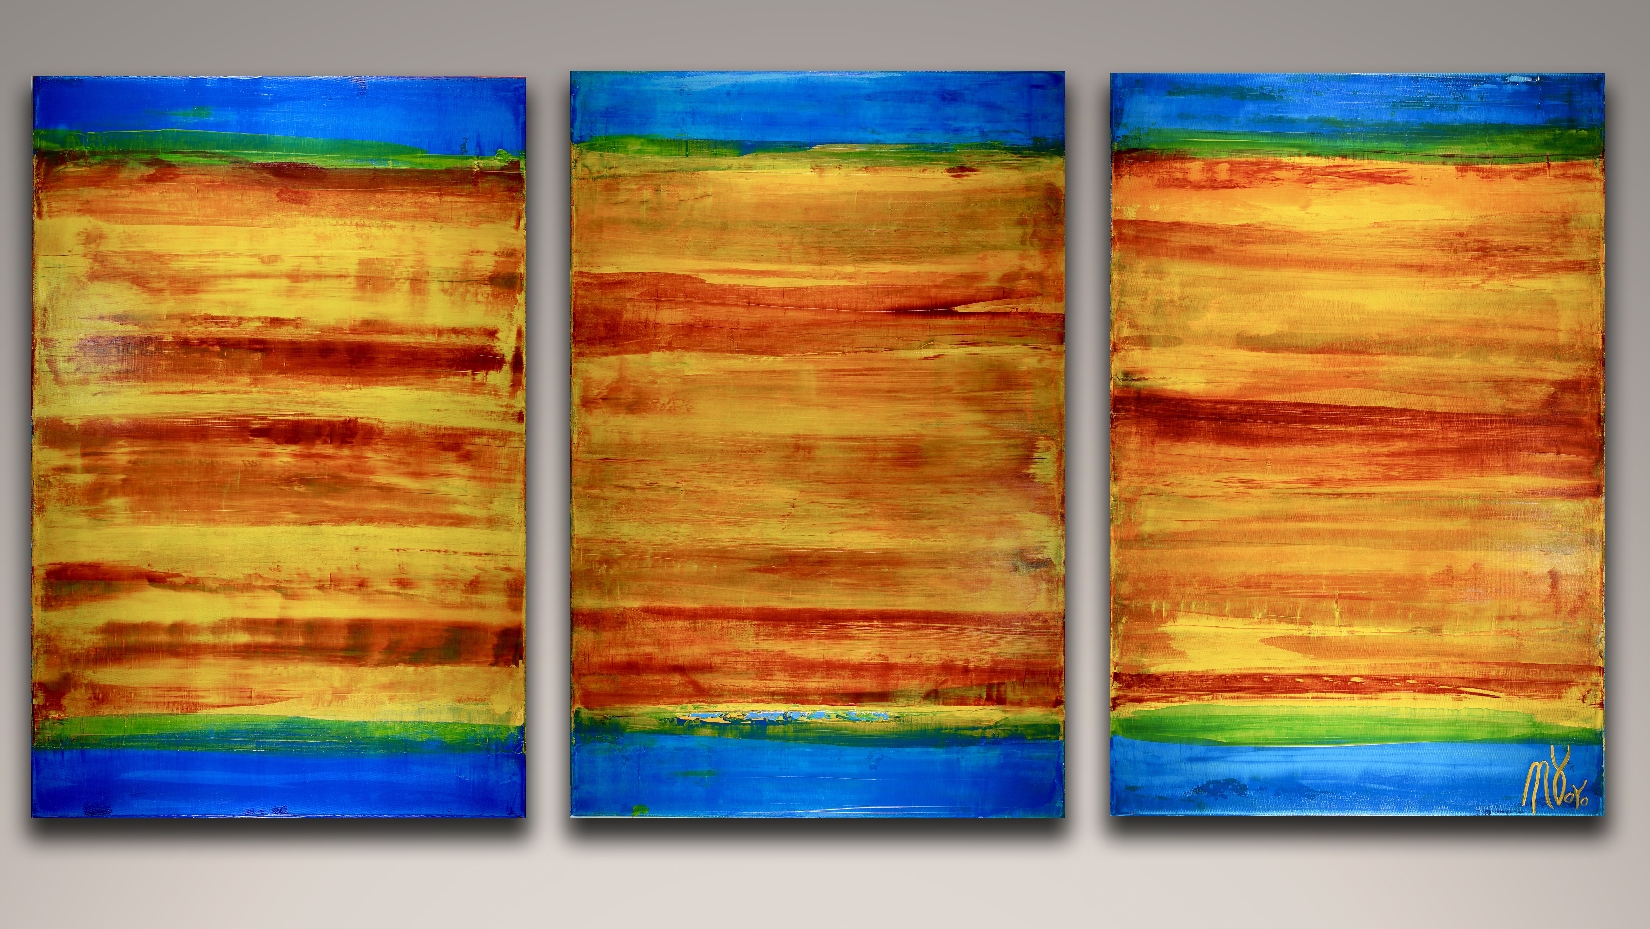 Fragmented Vibrant Sunset (2018) Triptych - Acrylic painting by Nestor Toro